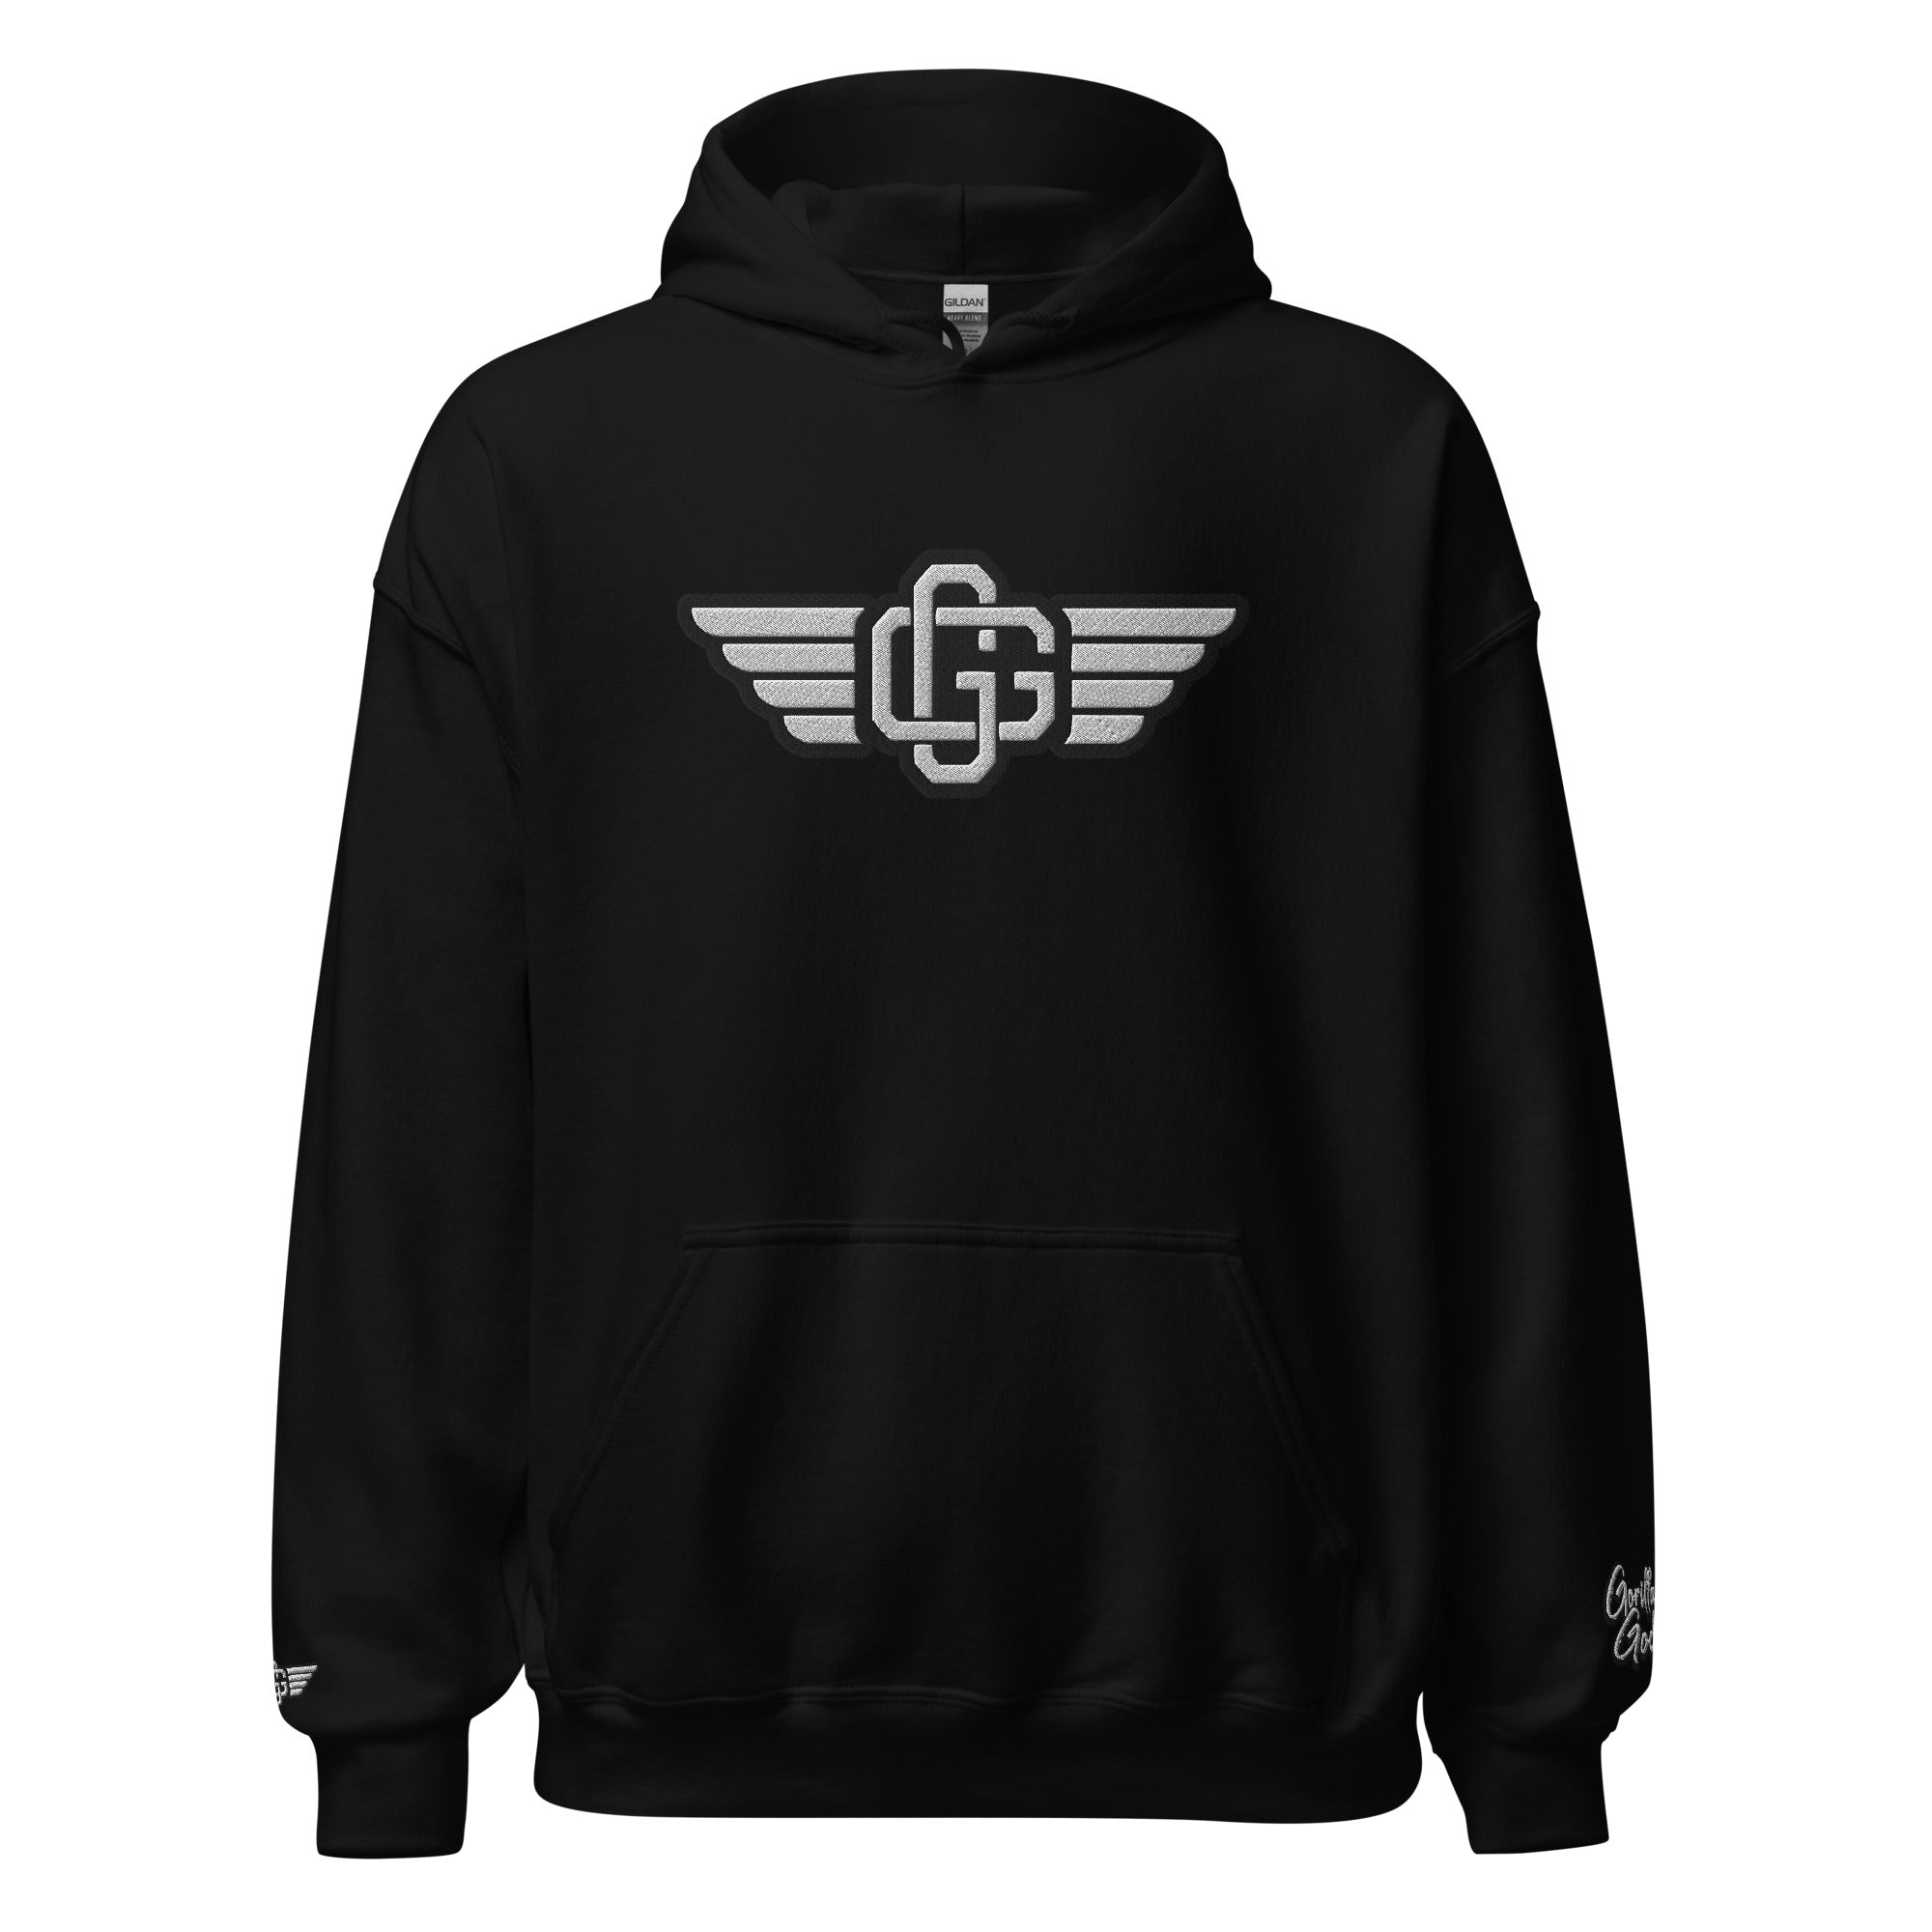 G-wingz Embroidered Unisex Hoodie